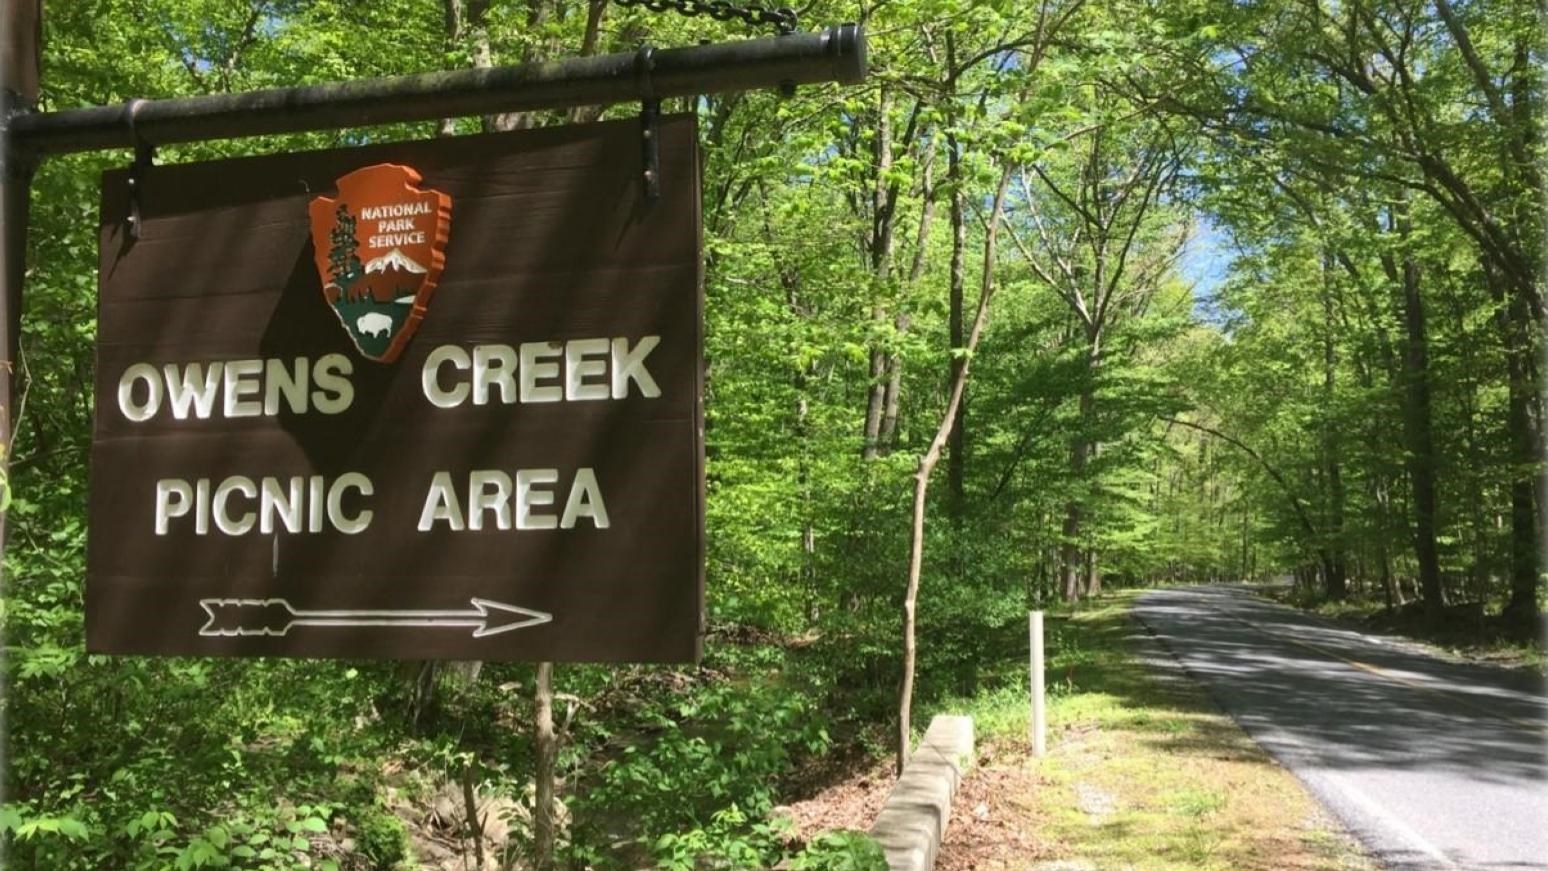 A wooden National Park Service sign on a roadside in a forested area.